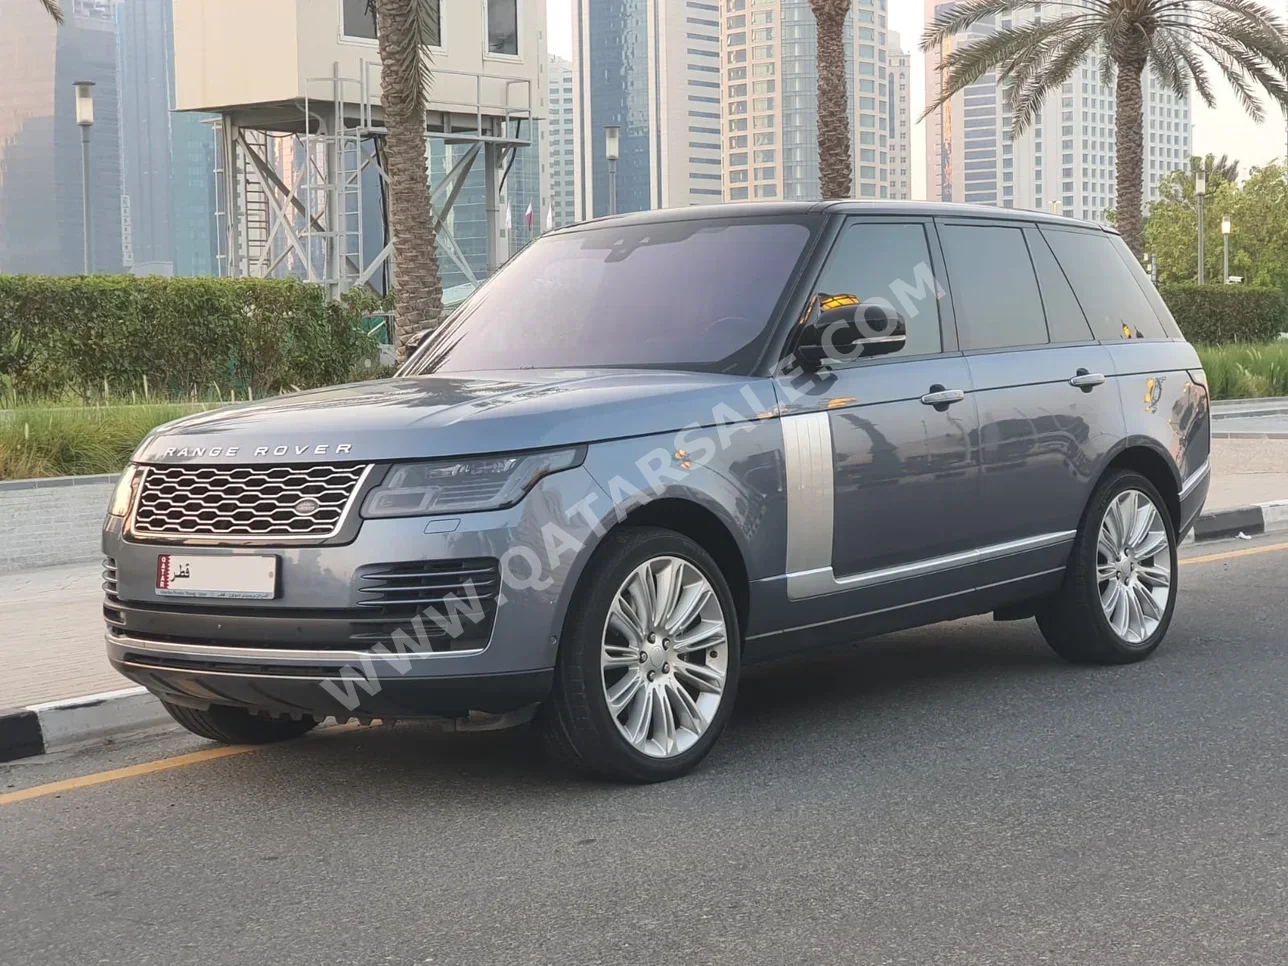 Land Rover  Range Rover  Vogue SE Super charged  2020  Automatic  64,000 Km  8 Cylinder  Four Wheel Drive (4WD)  SUV  Blue  With Warranty